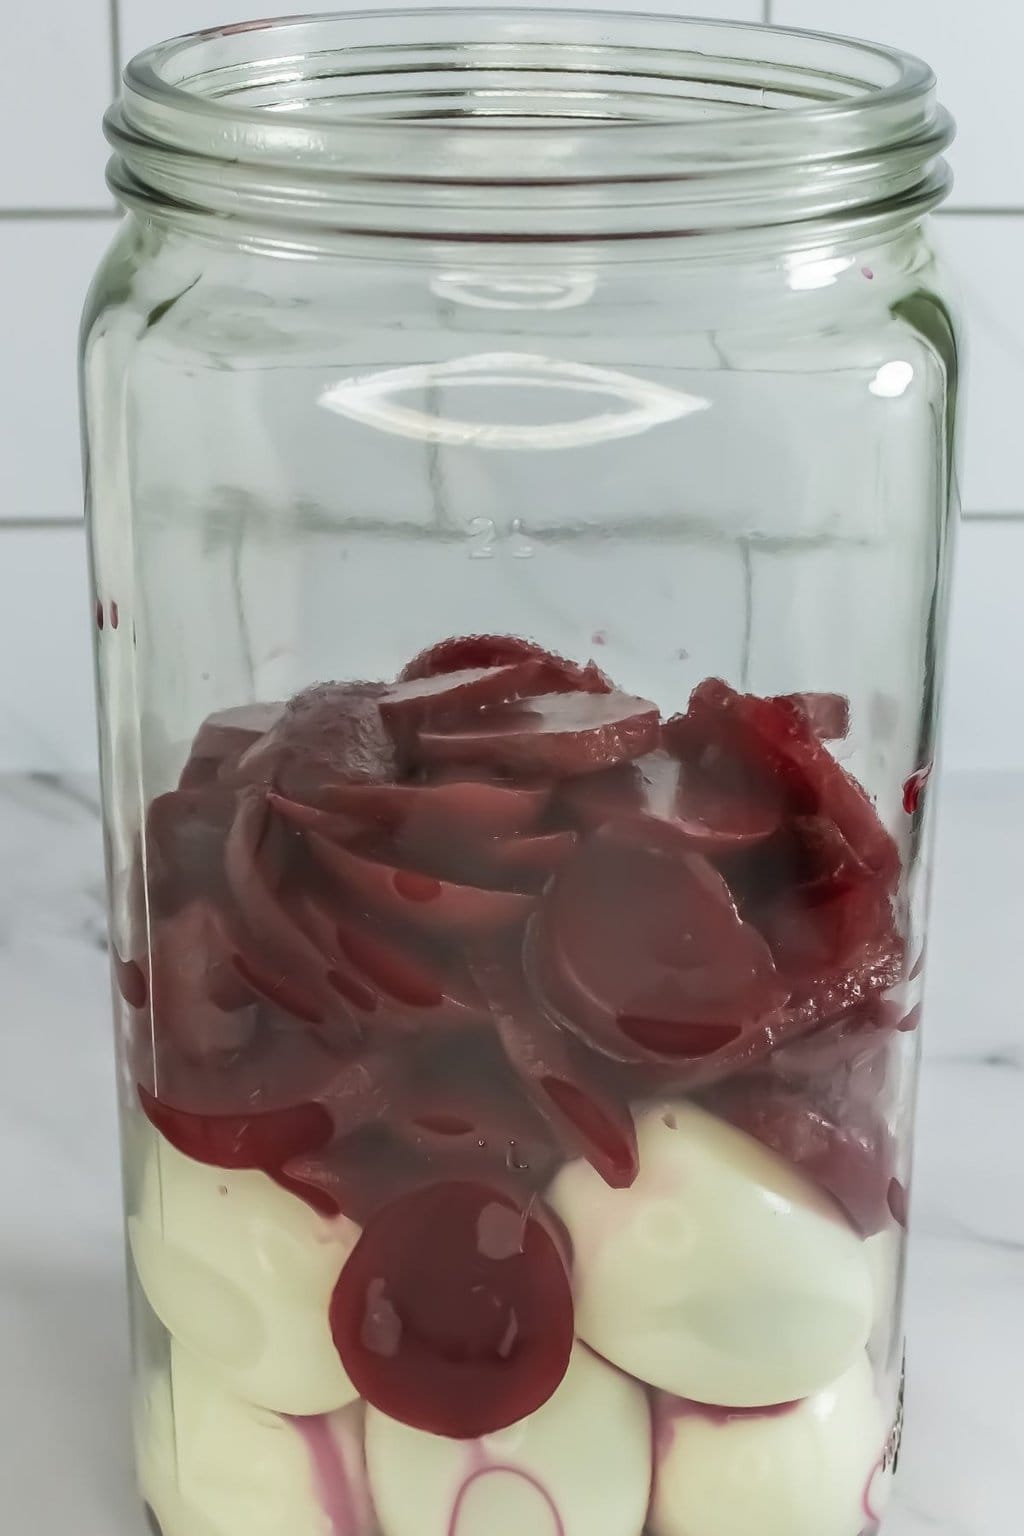 Beets and eggs in a glass jar.